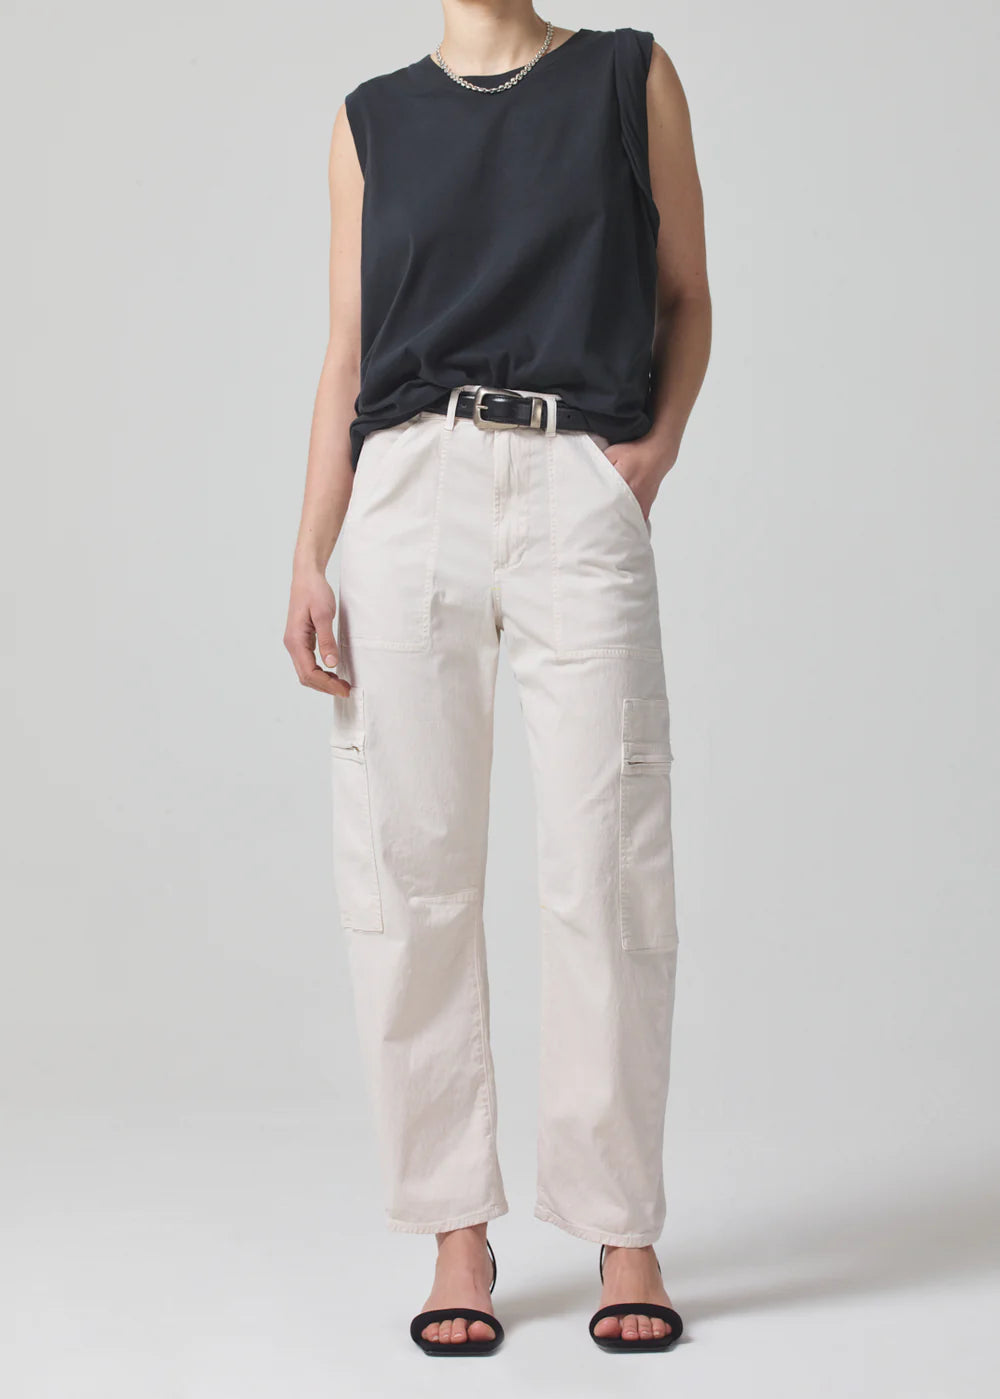 Citizens of Humanity Marcelle Low Slung Cargo, cargo pants, pants, white cargo pants, women's clothing